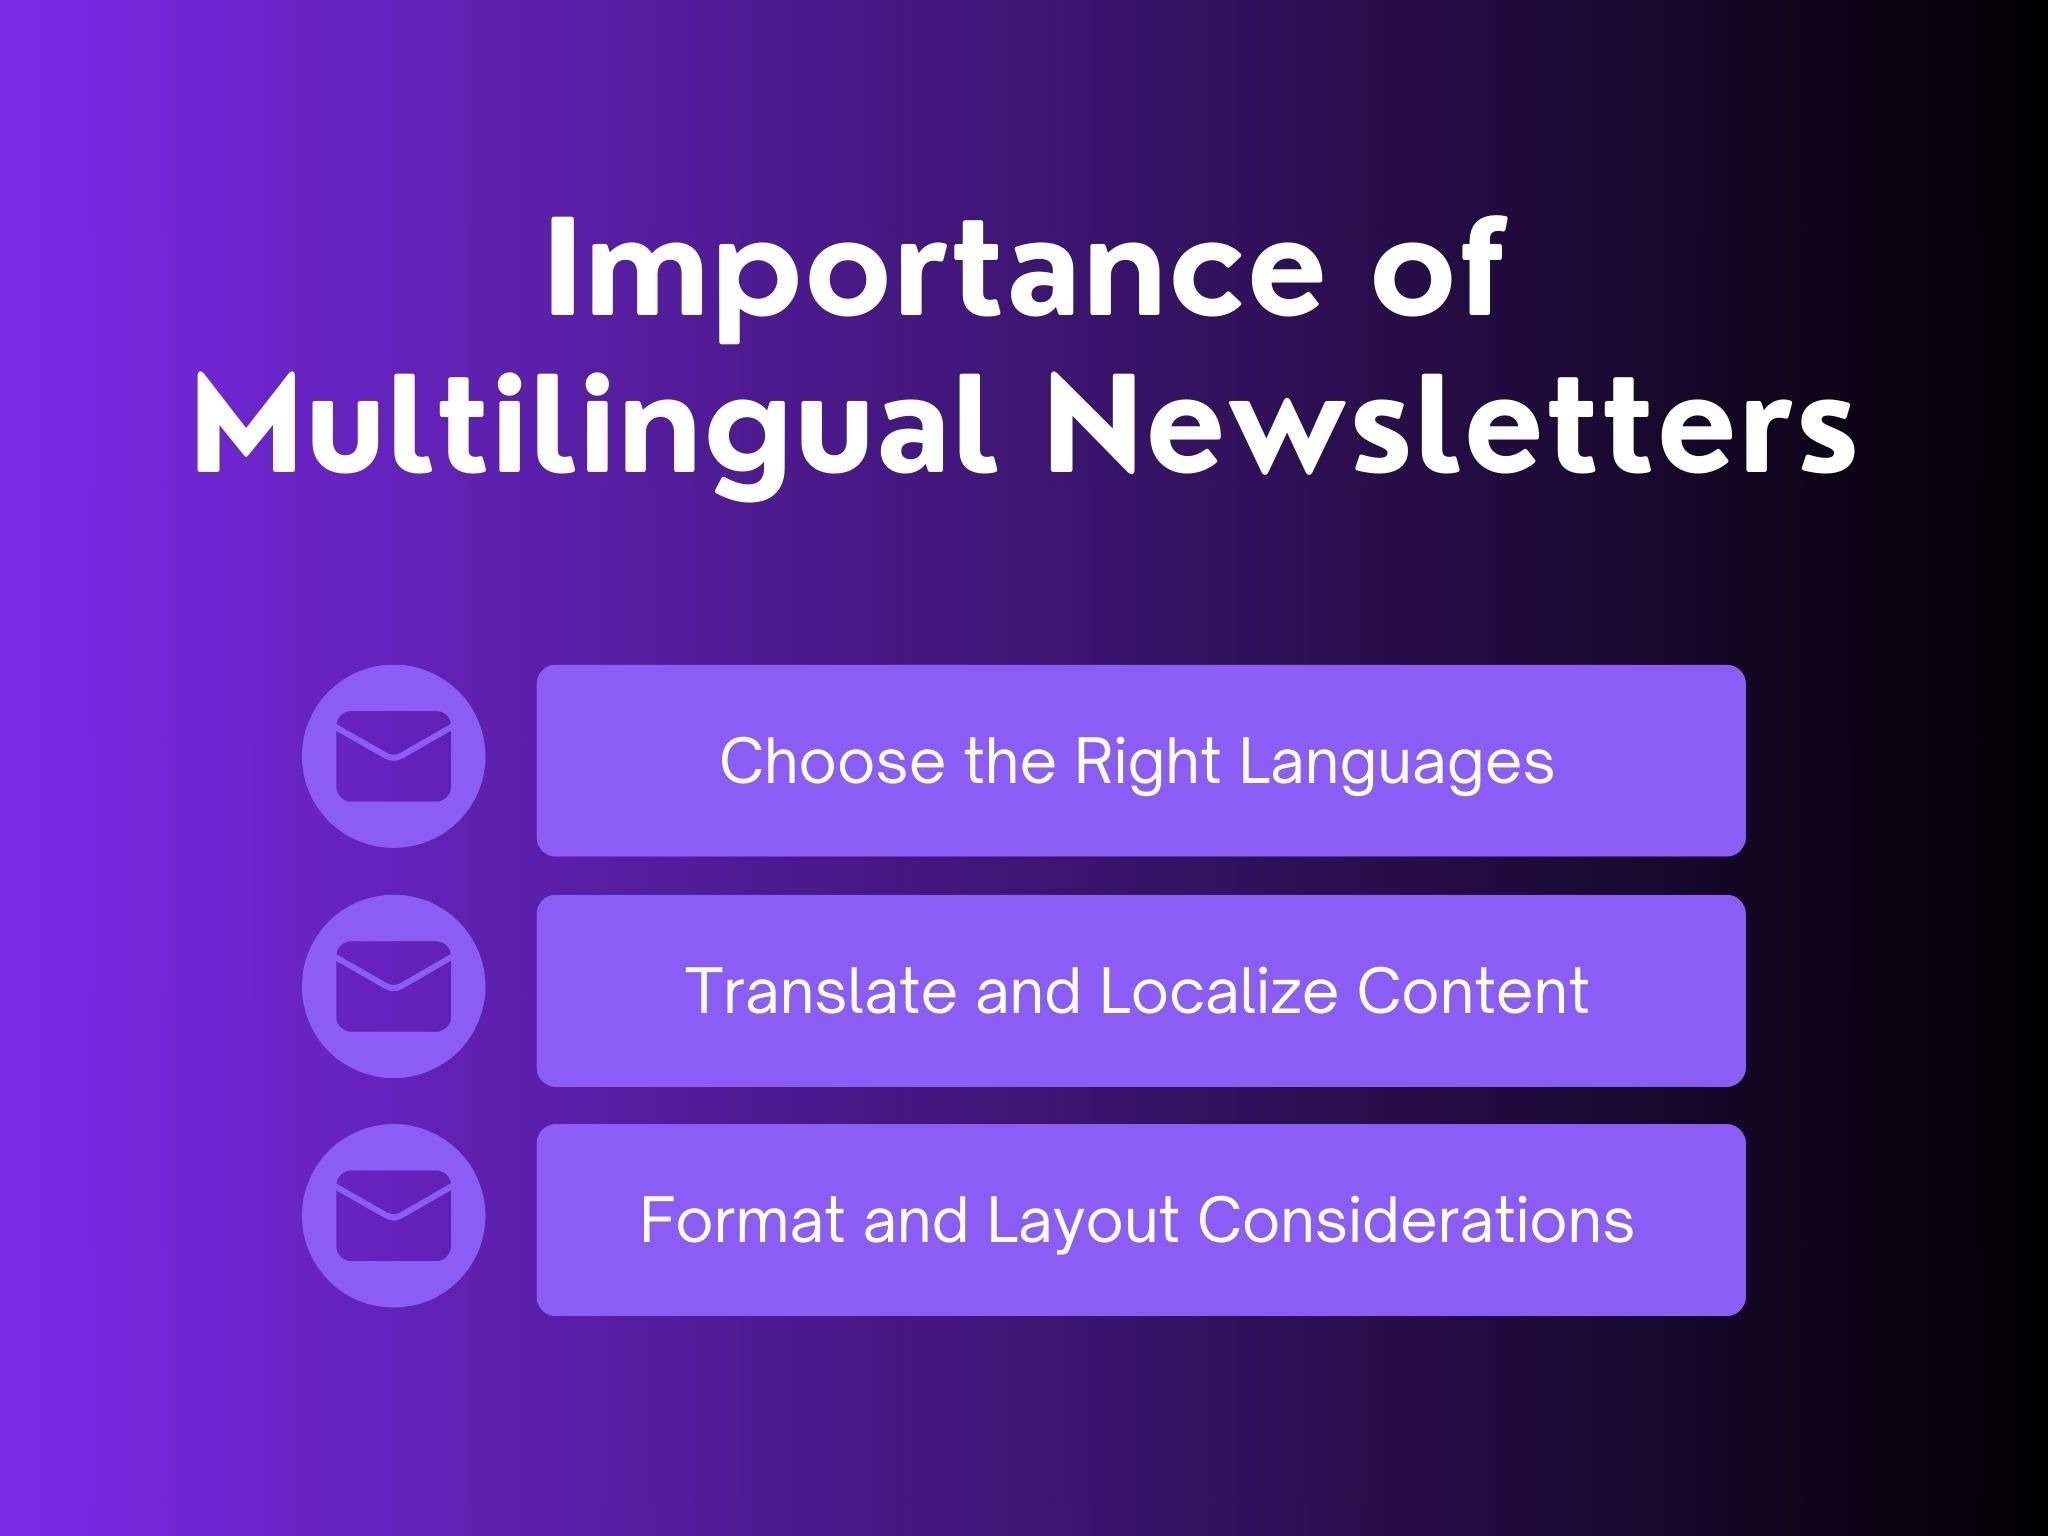 The Importance of Multilingual Newsletters